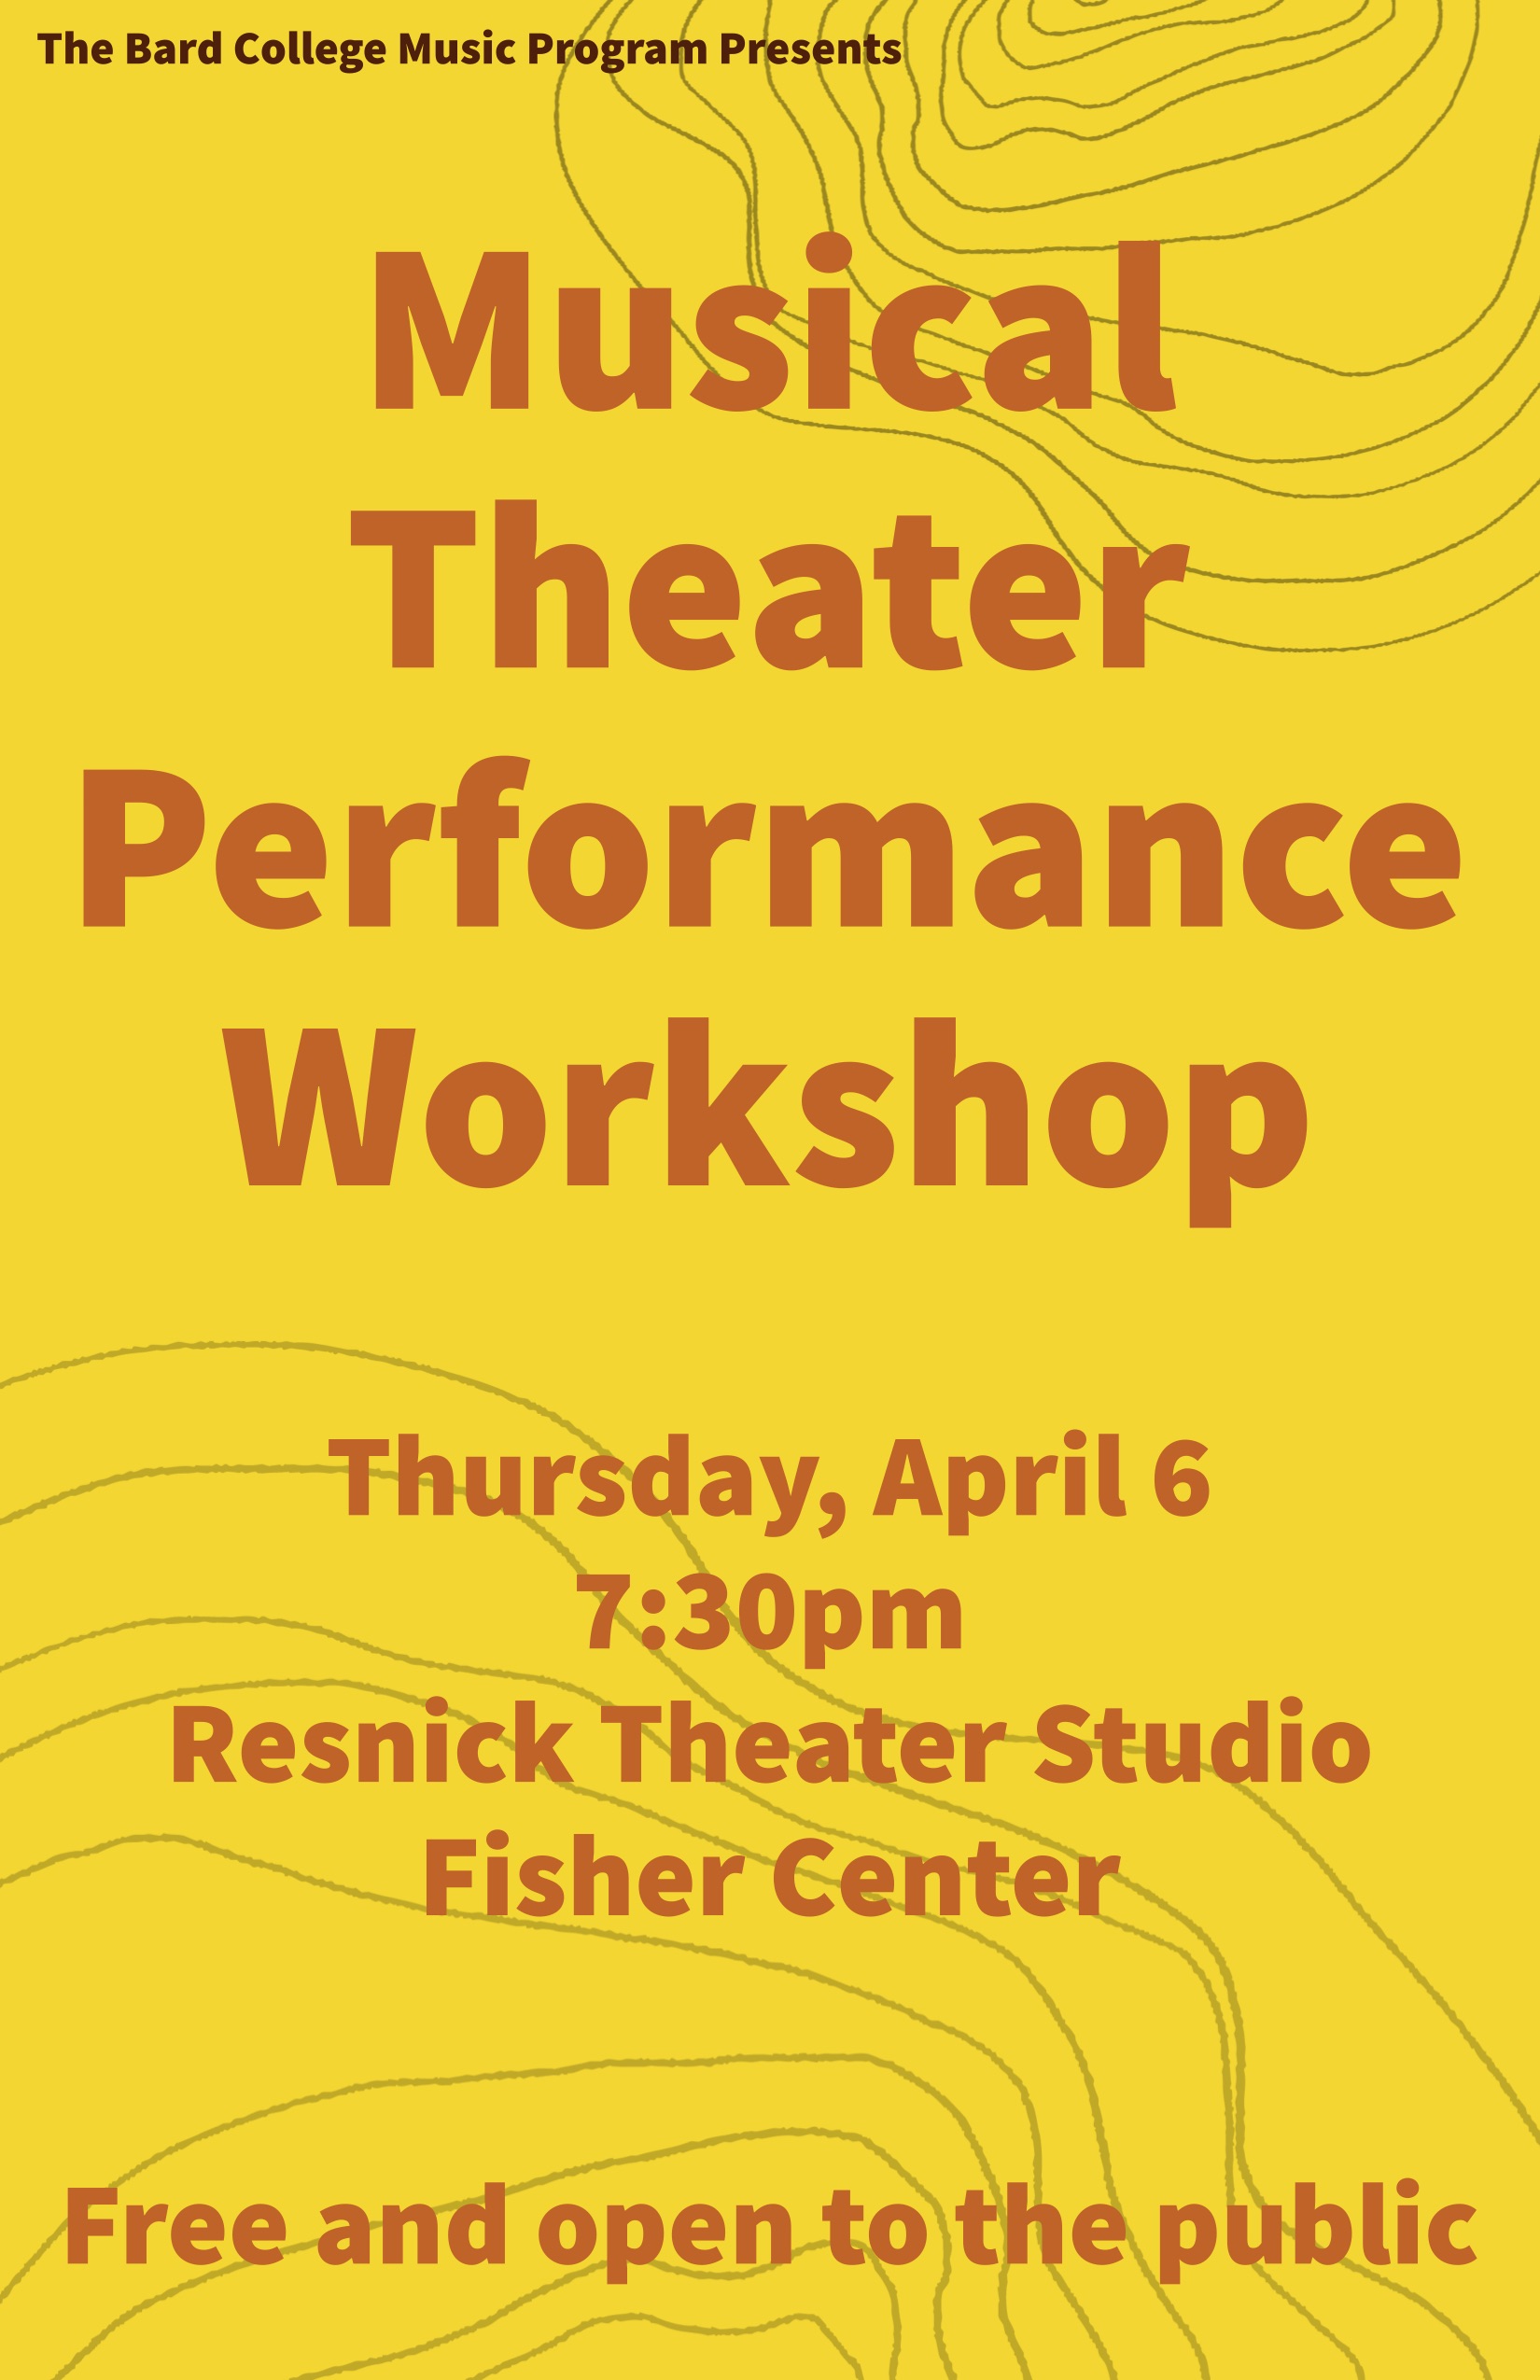 Musical Theater Performance Workshop